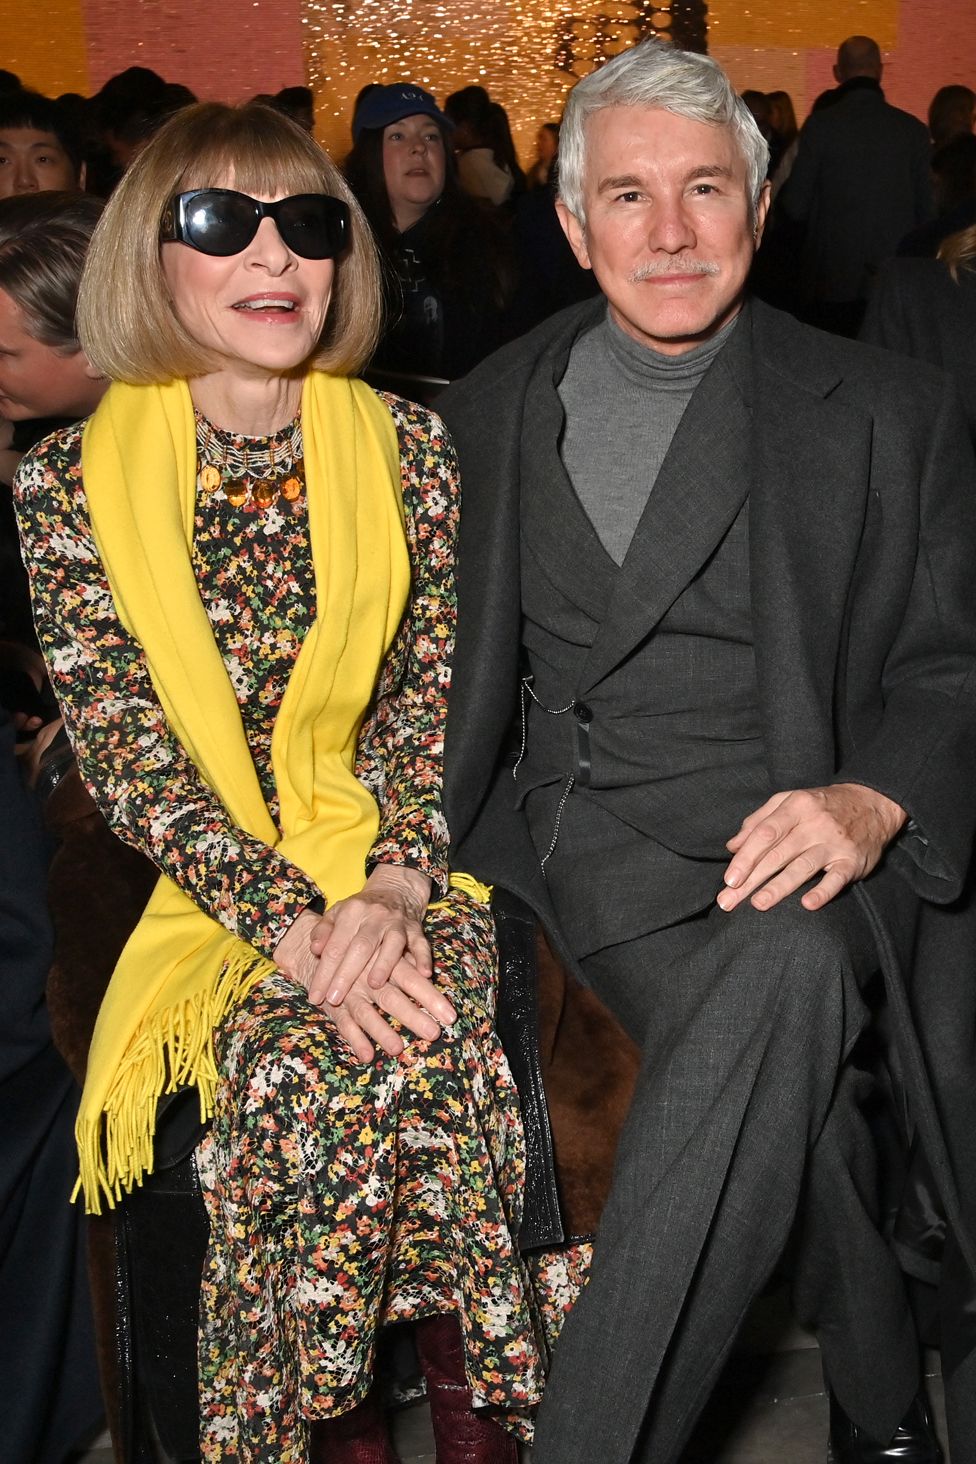 Editor-In-Chief of American Vogue and Chief Content Officer of Conde Nast Dame Anna Wintour and Baz Luhrmann attend the Christian Dior front row during Paris Fashion Week Haute Couture Spring Summer 2023 on January 23, 2023 in Paris, France.